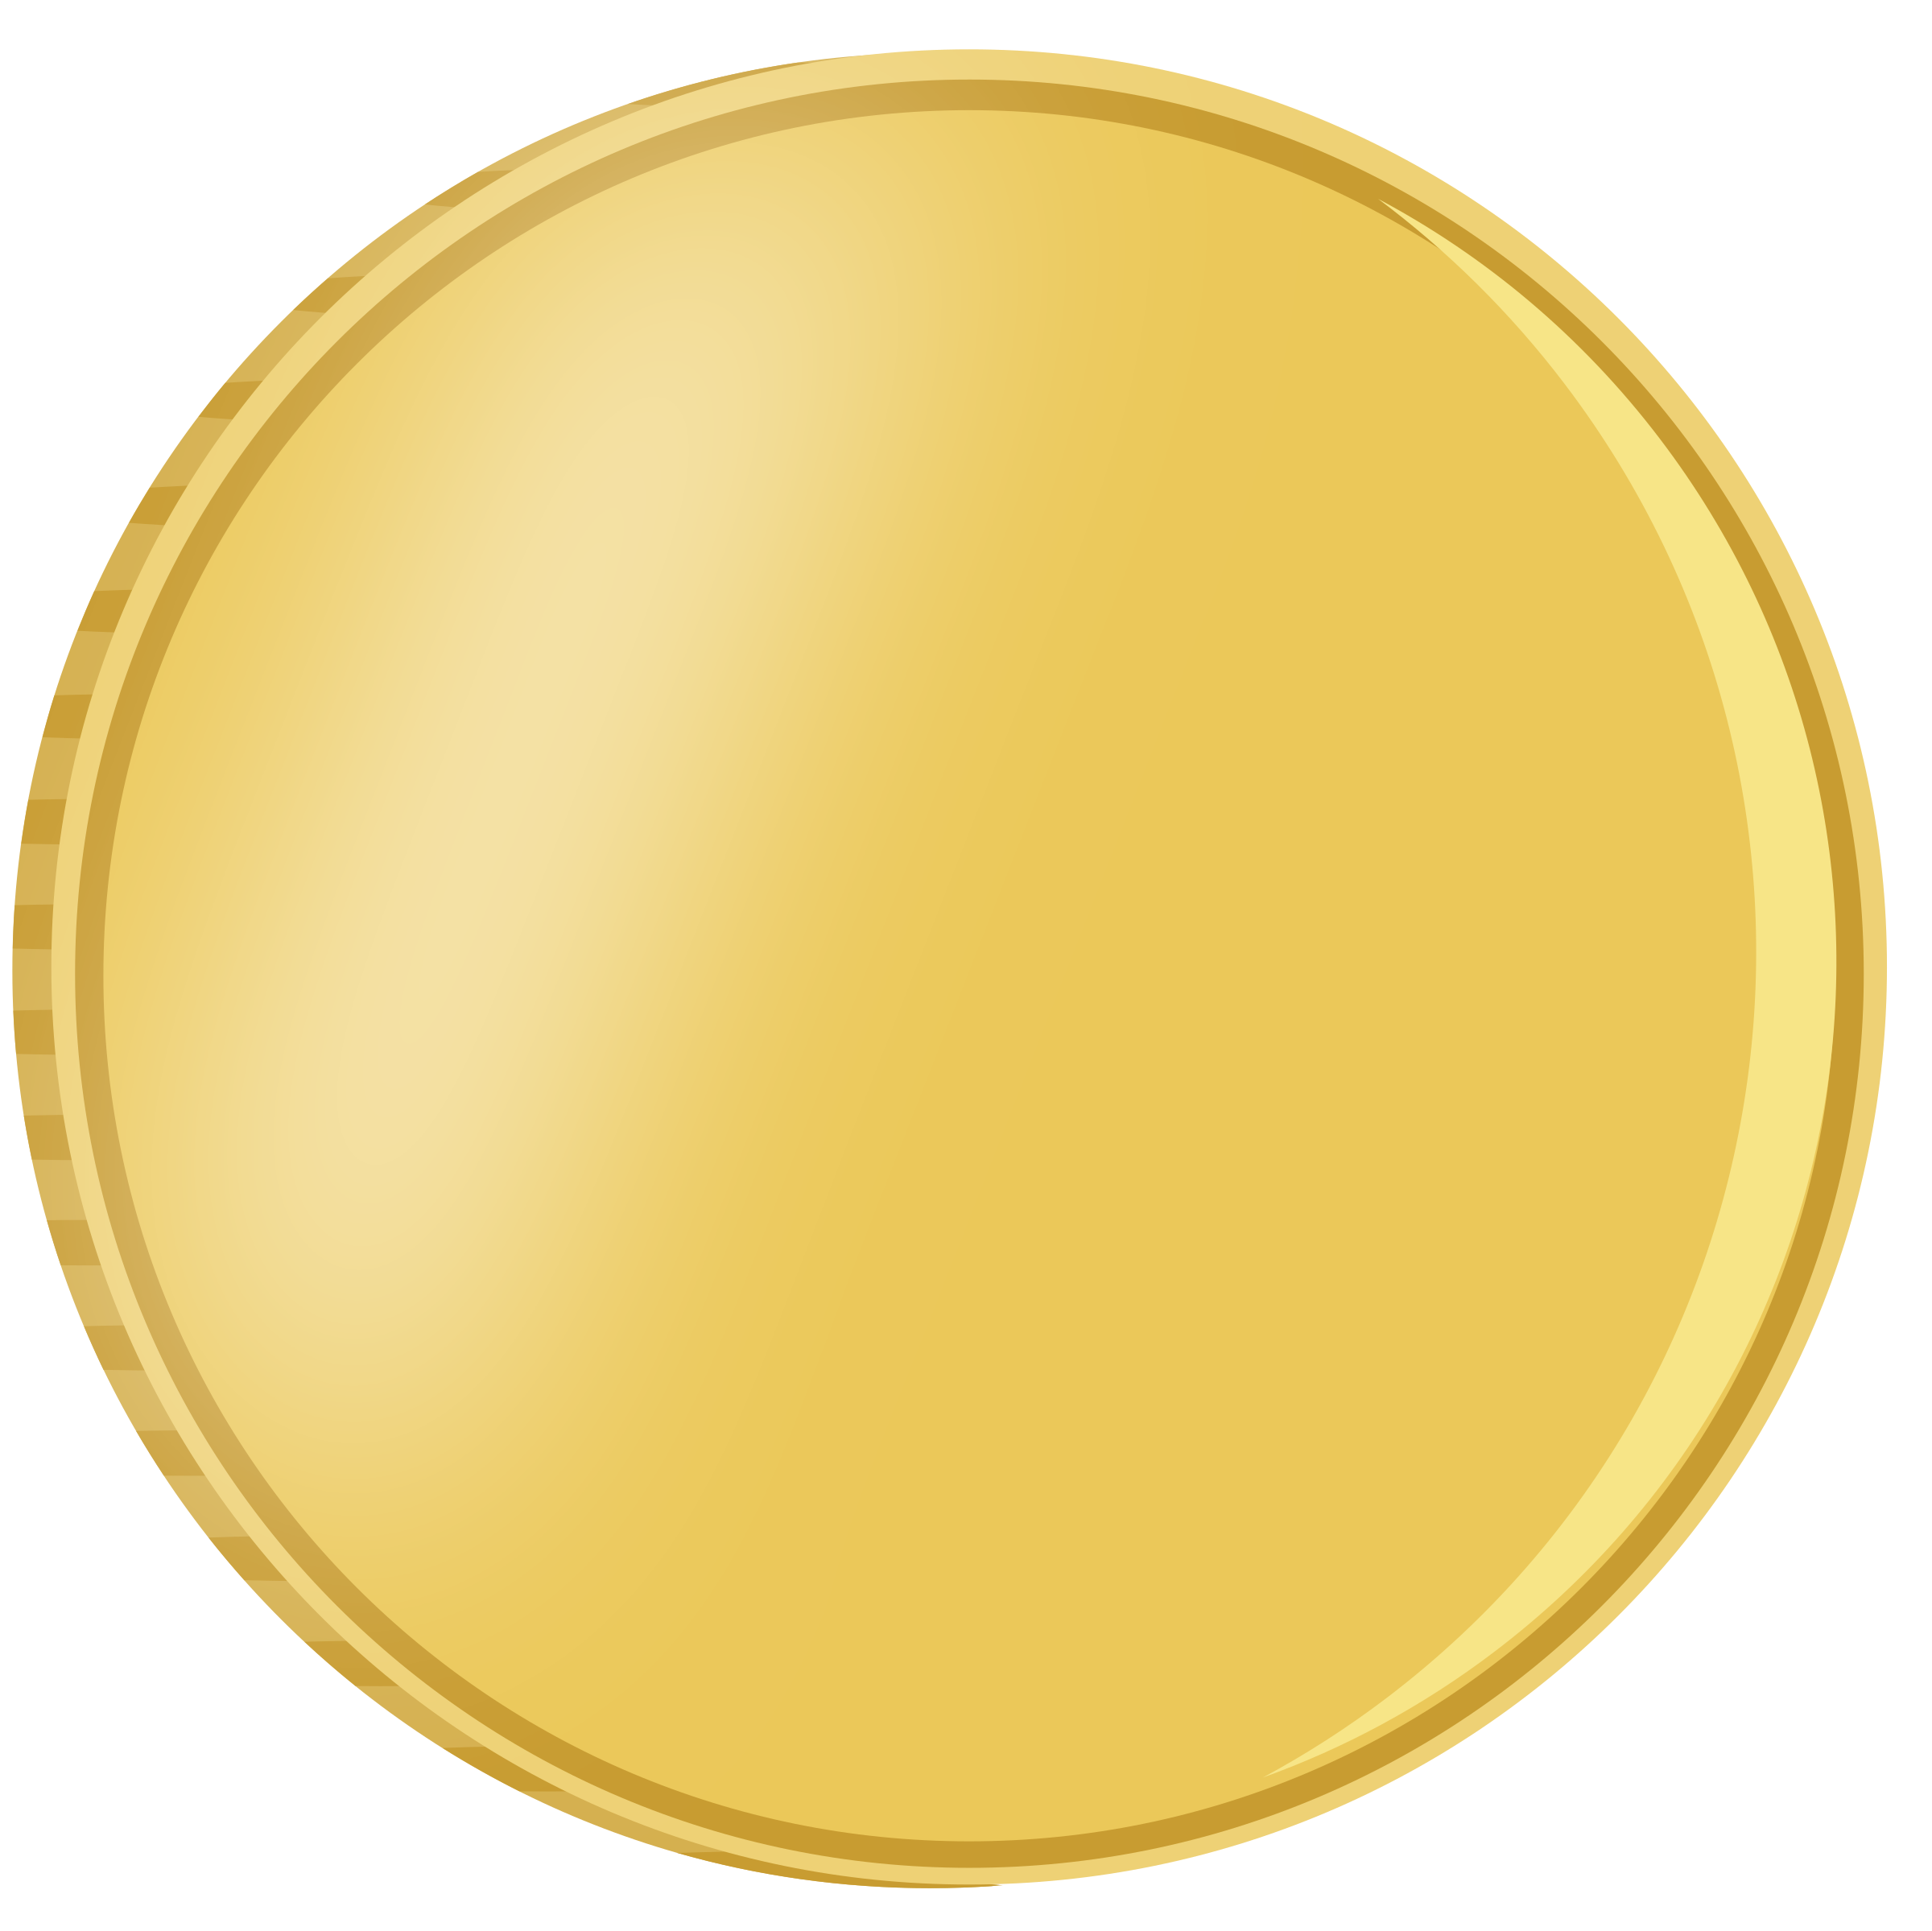 Blank Coin PNG Transparent Blank Coin.PNG Images. PlusPNG